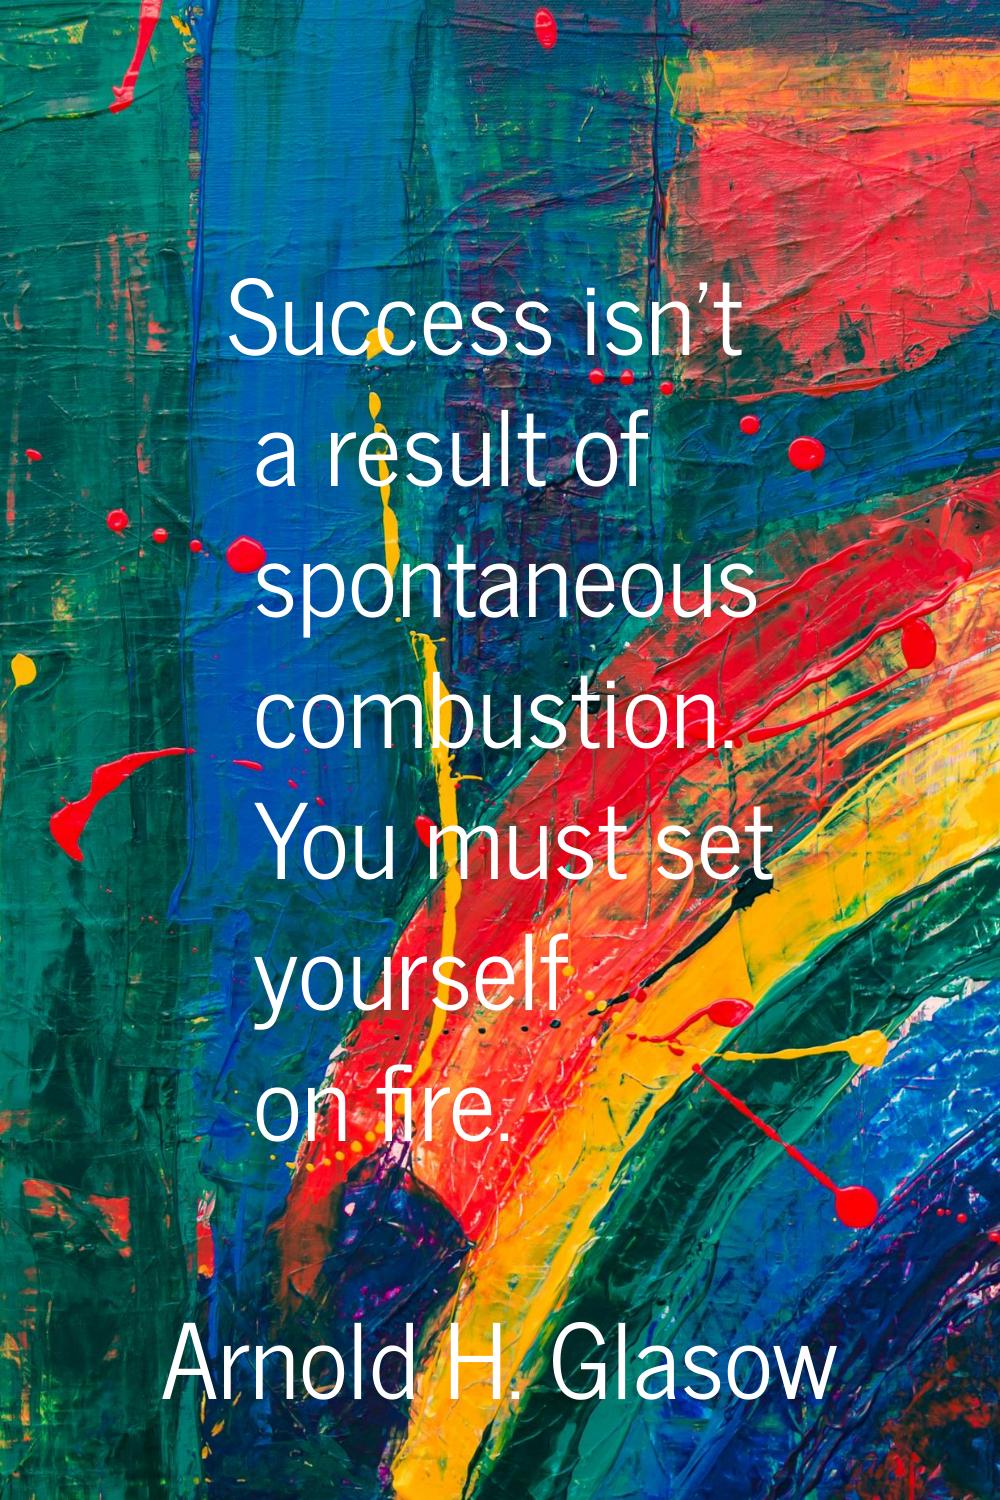 Success isn't a result of spontaneous combustion. You must set yourself on fire.